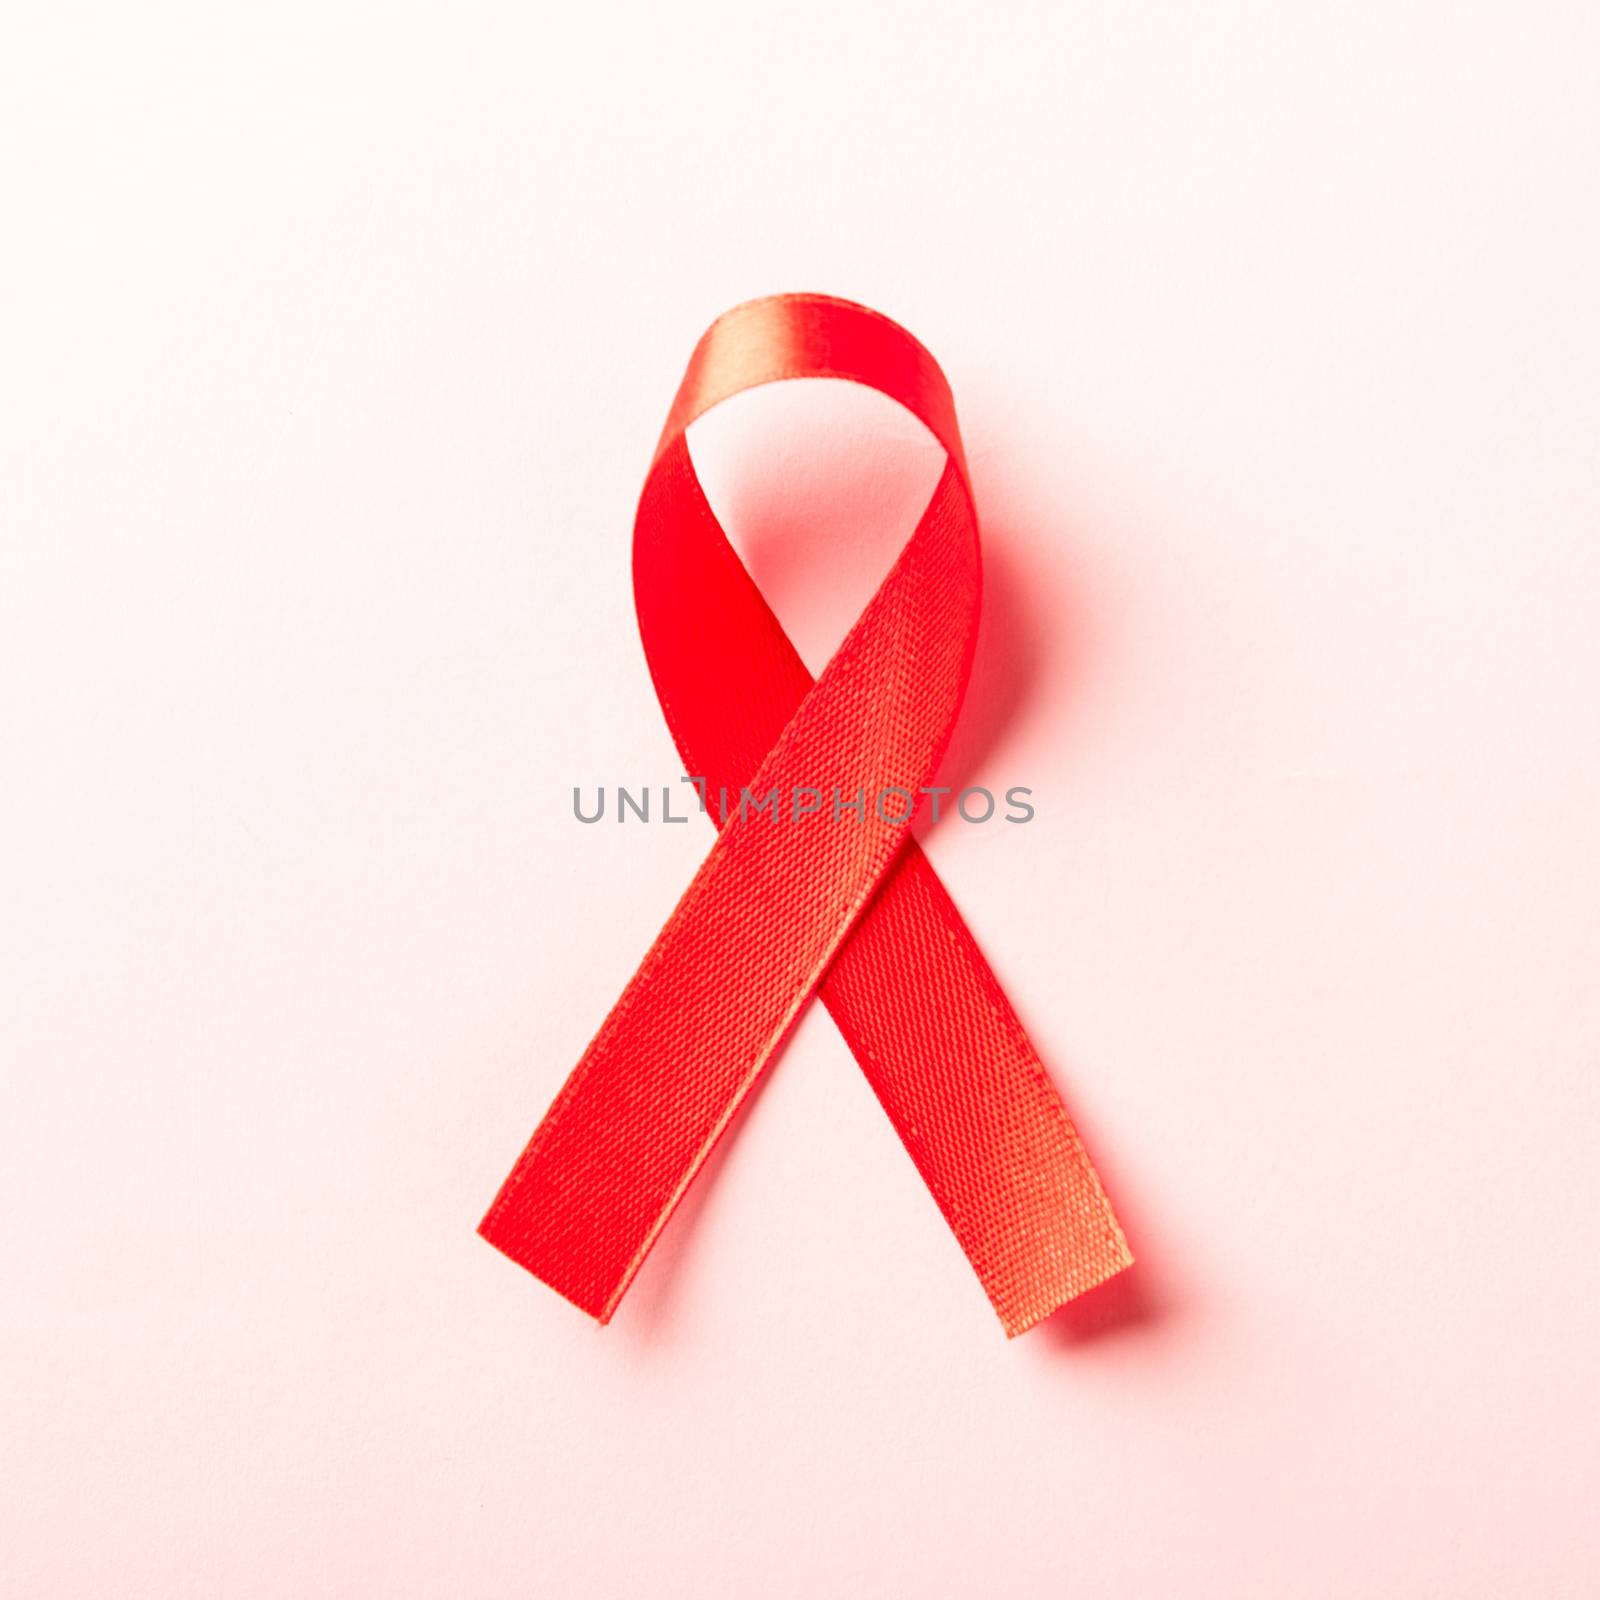 Red bow ribbon symbol HIV, AIDS cancer awareness by Sorapop